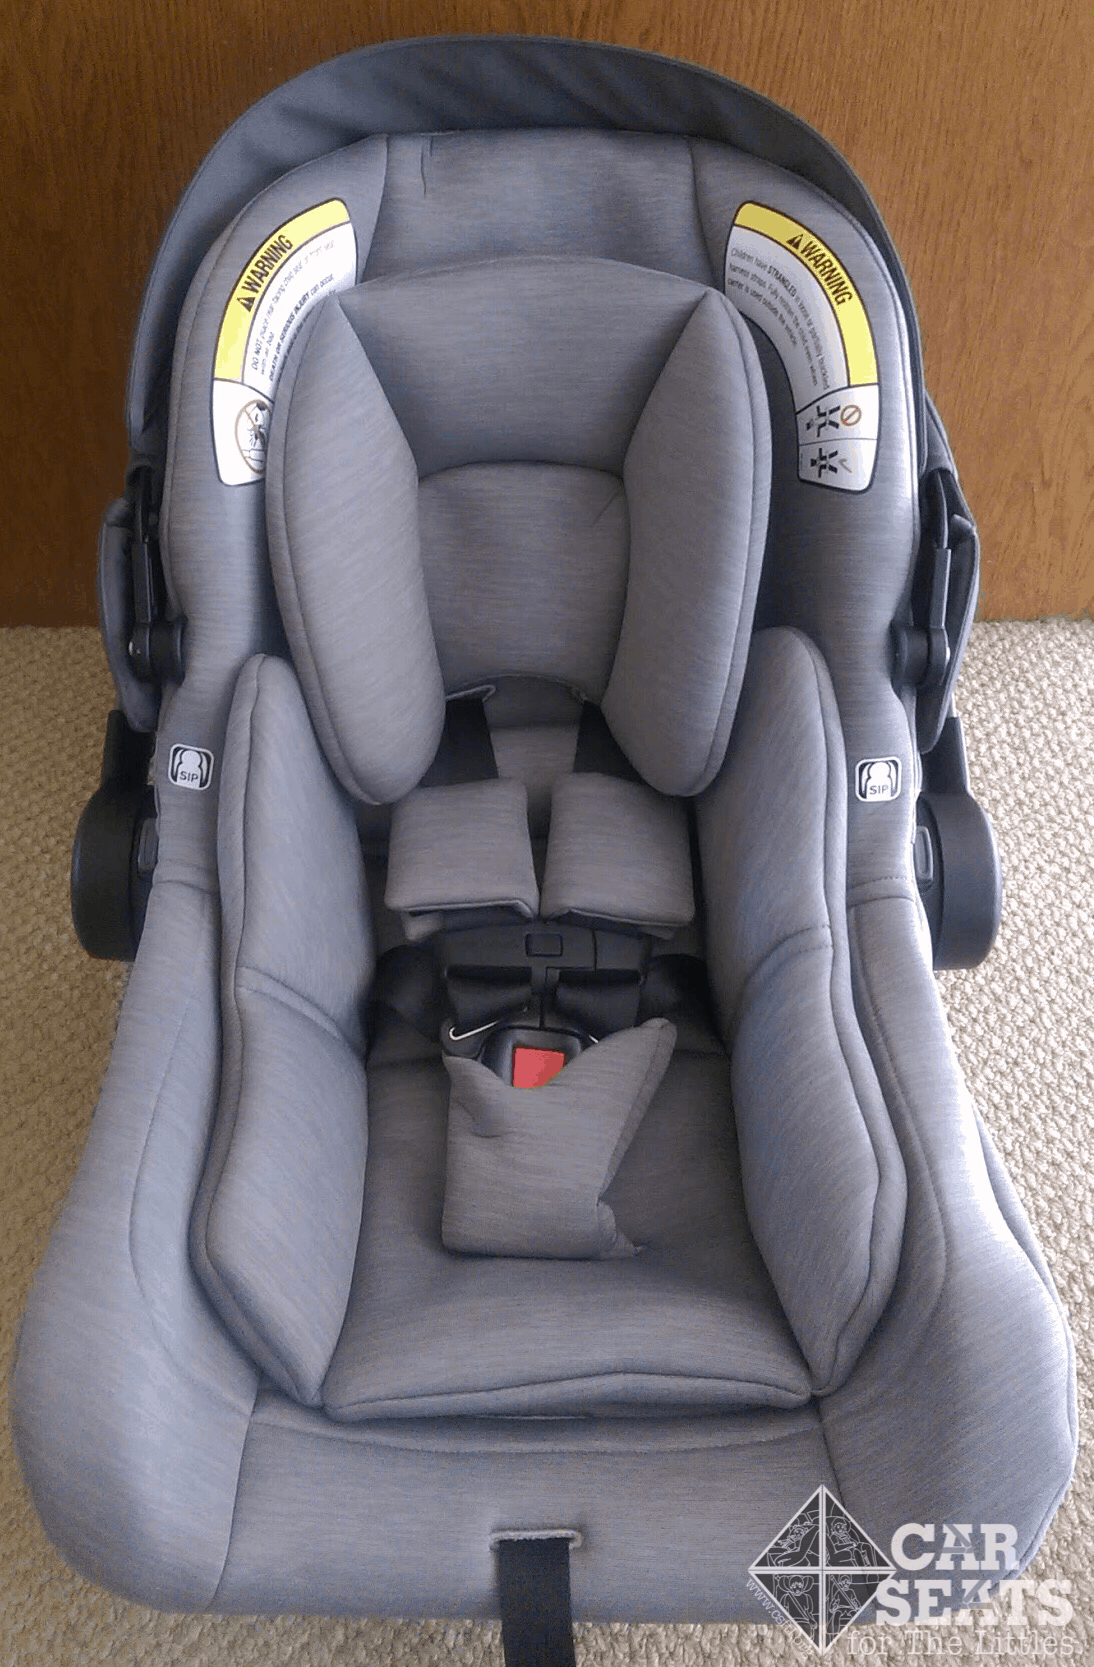 Nuna PIPA Lite Review - Car Seats For The Littles